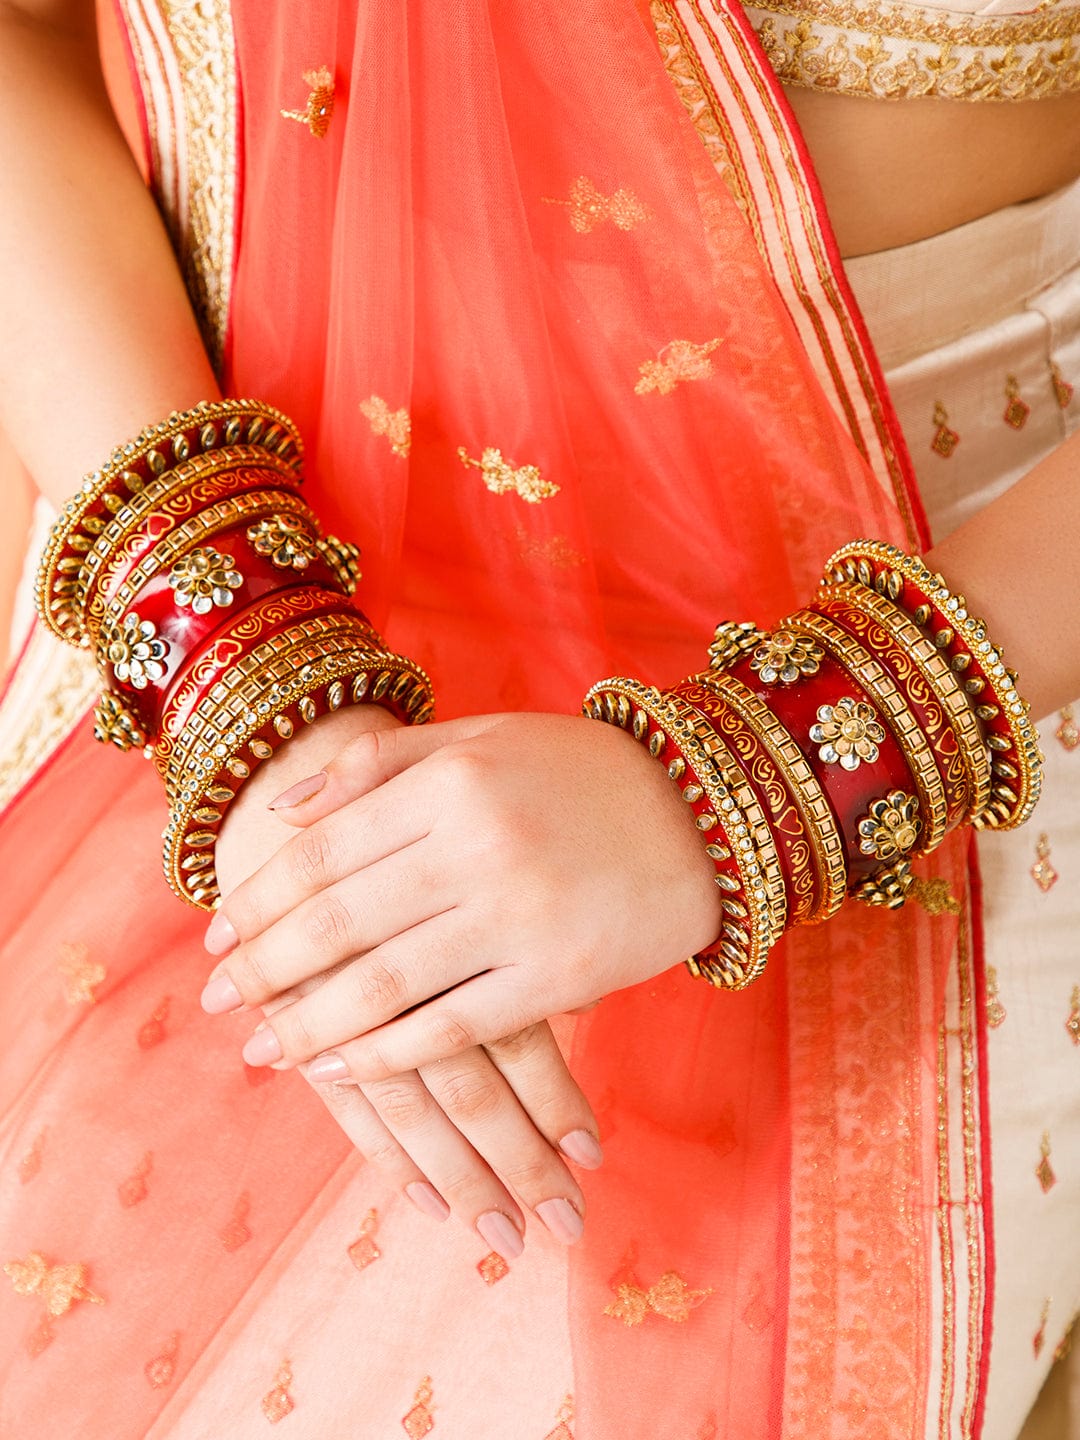 Rubans Maroon And White Color Bridal Chura With Floral Design And Studded AD. Bangles & Bracelets